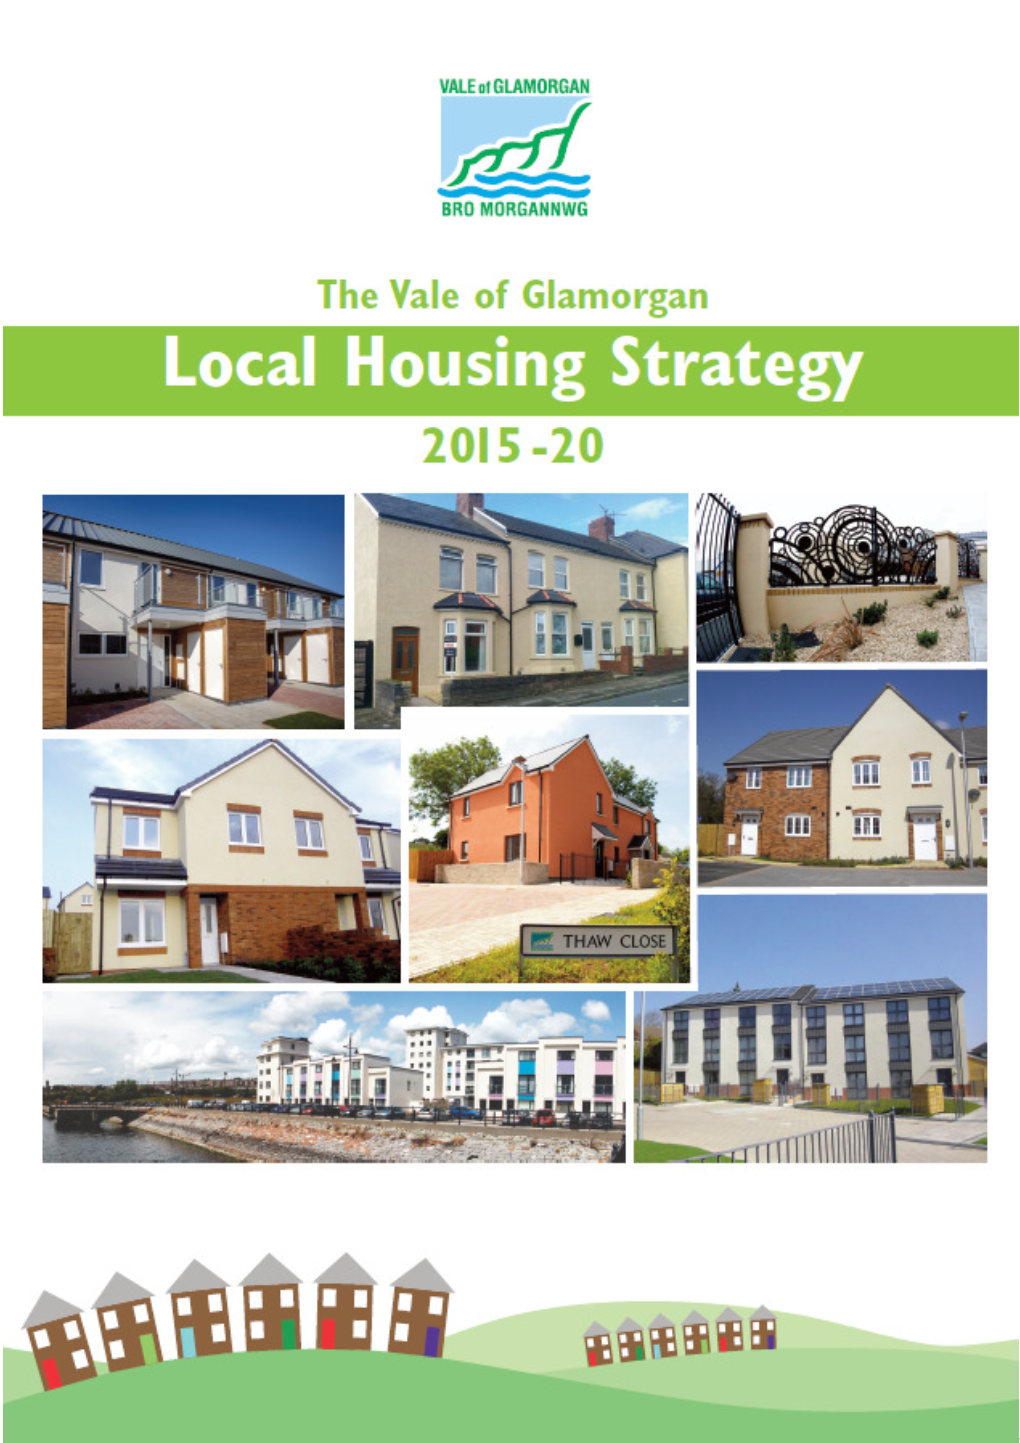 Local Housing Strategy 2015-20 for the Vale of Glamorgan